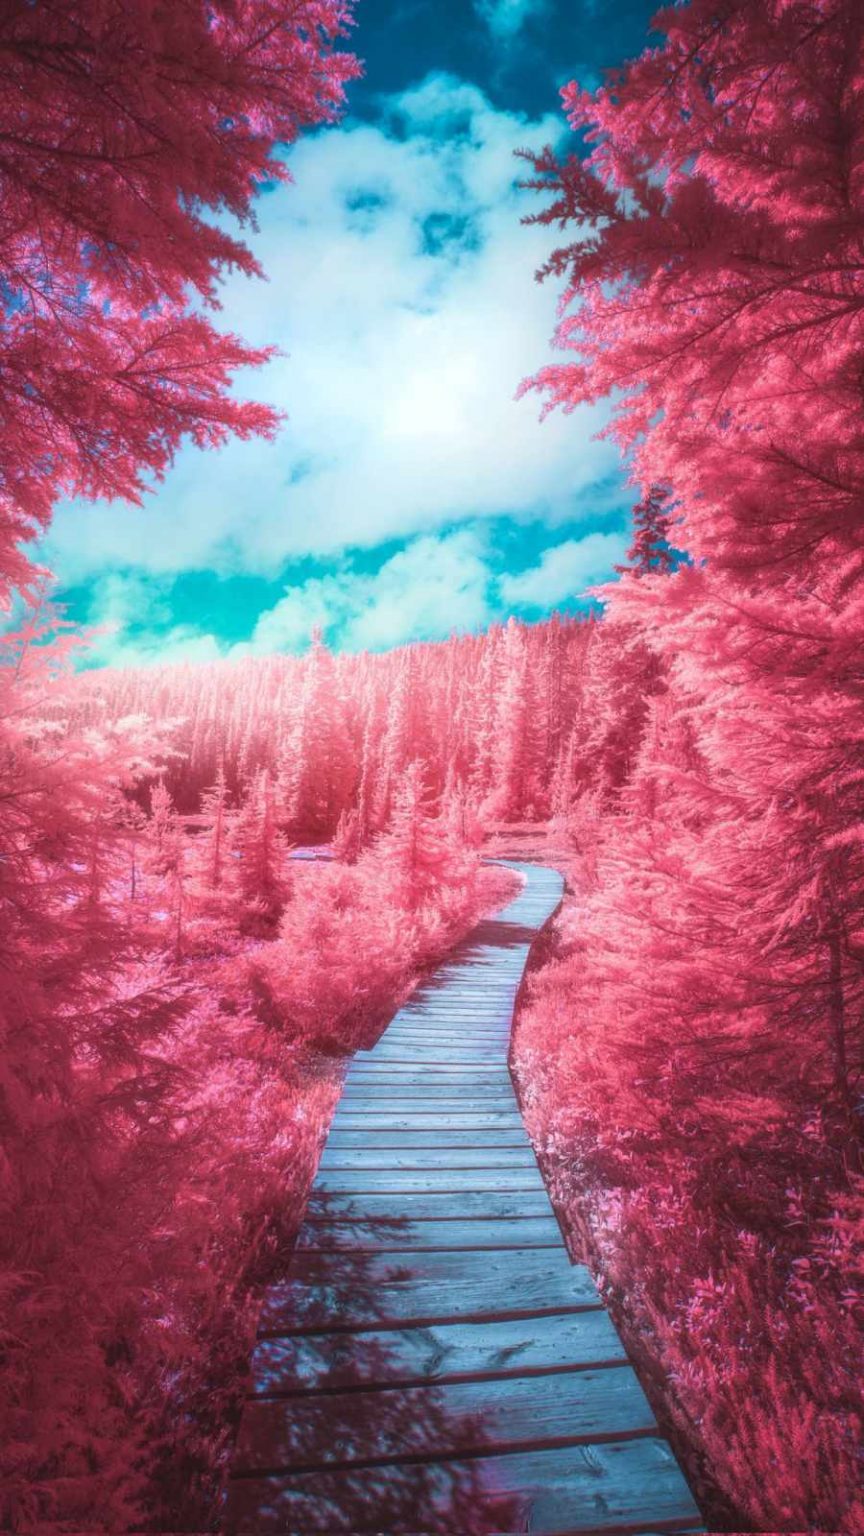 Infrared Vision Forest IPhone Wallpaper - IPhone Wallpapers : iPhone ...